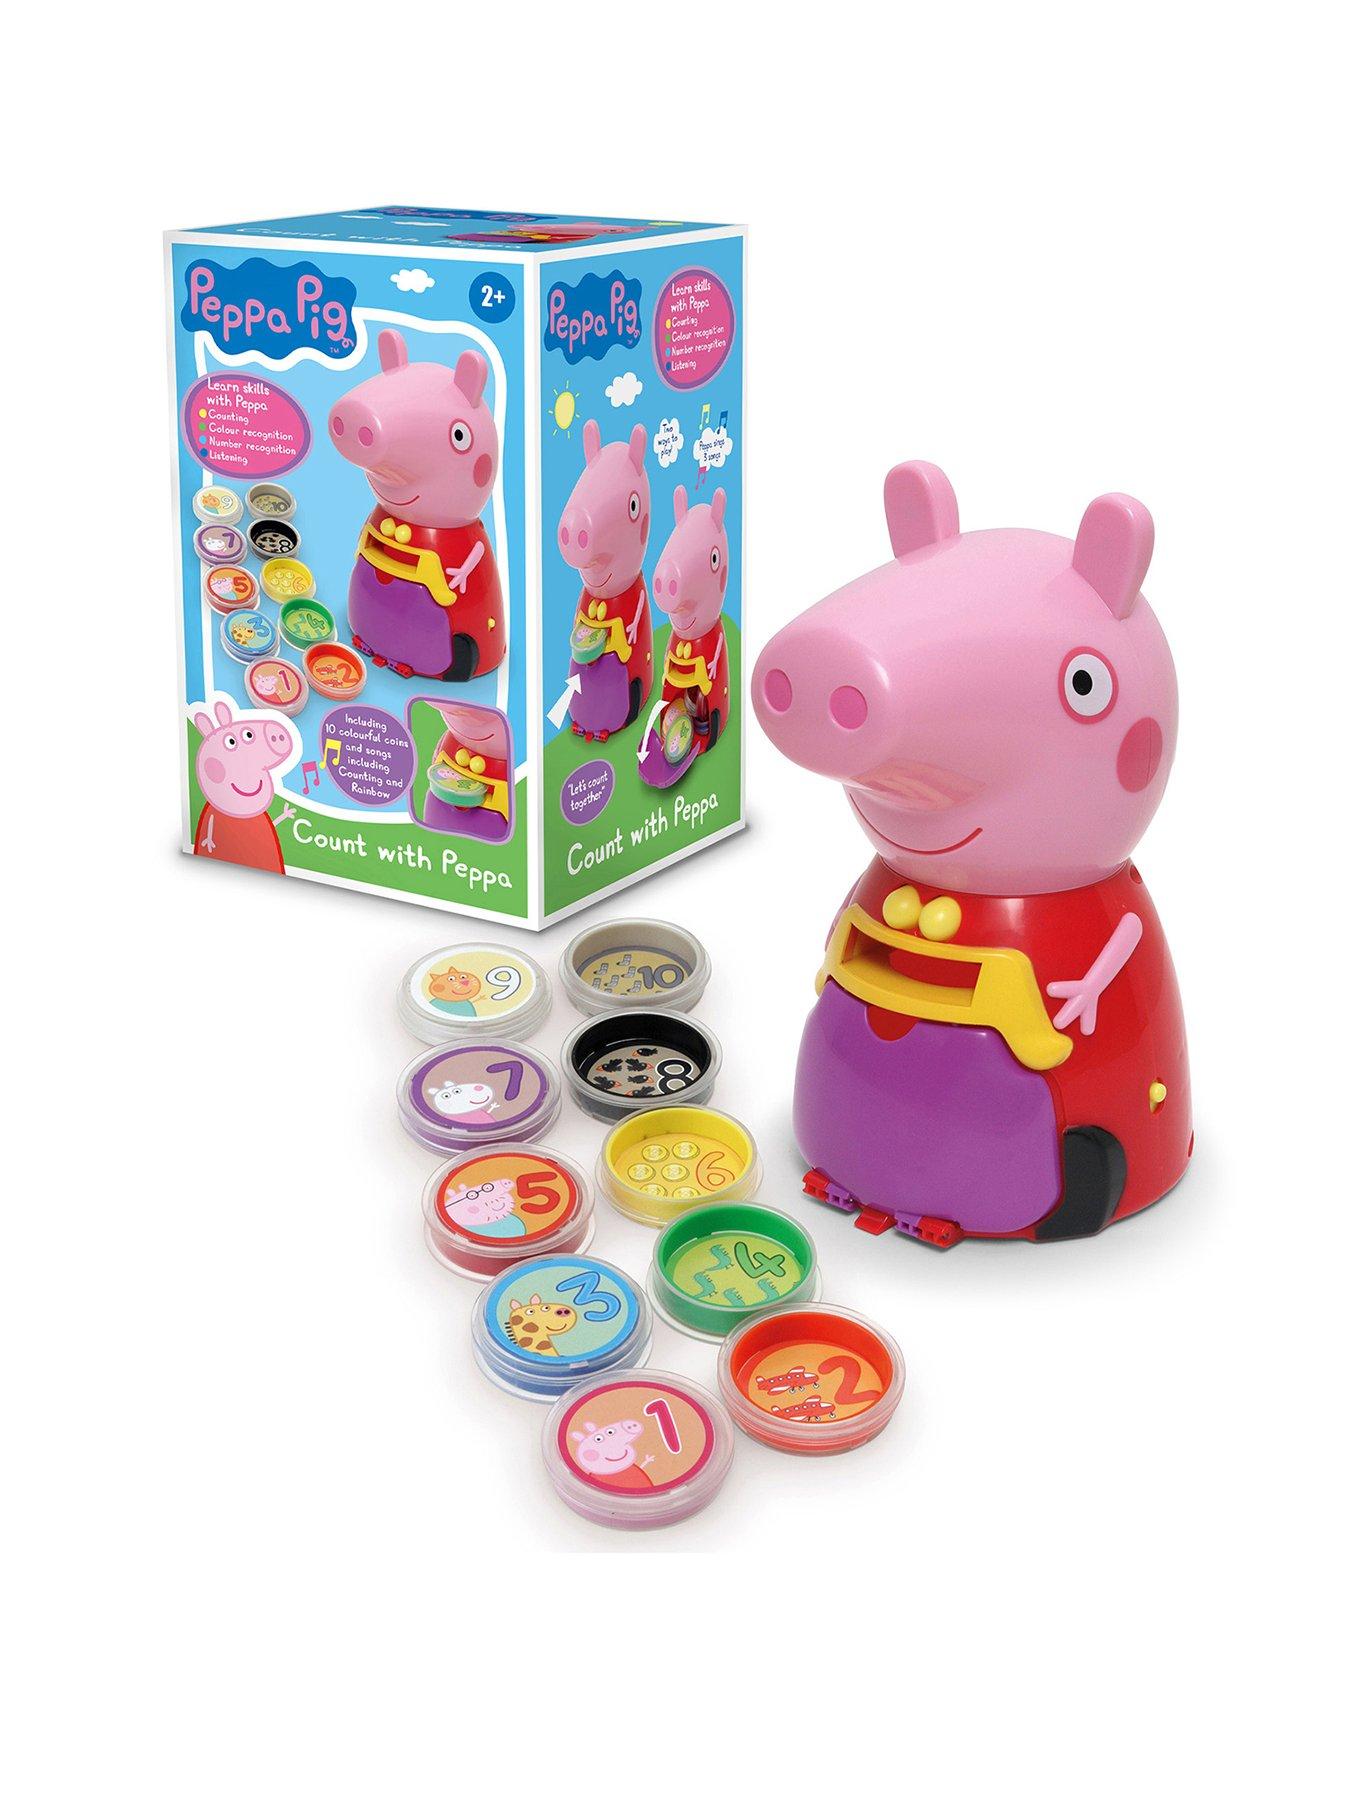 pig toys for toddlers